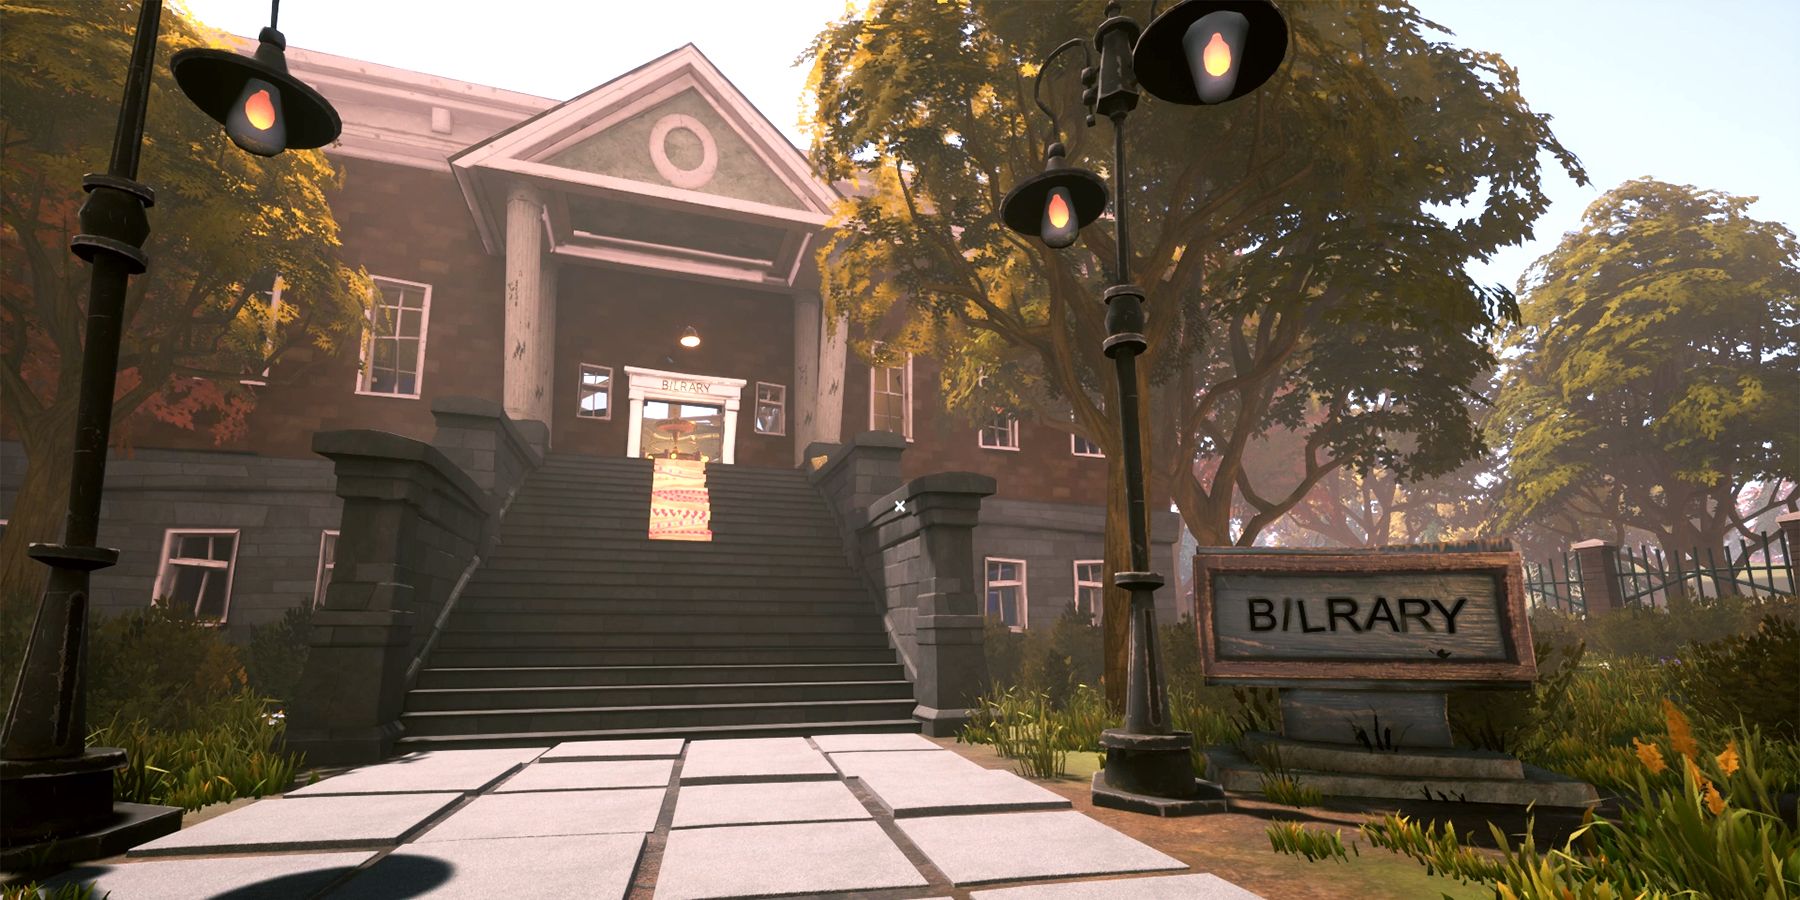 hello-neighbor-2-where-to-find-all-books-in-late-fees-dlc